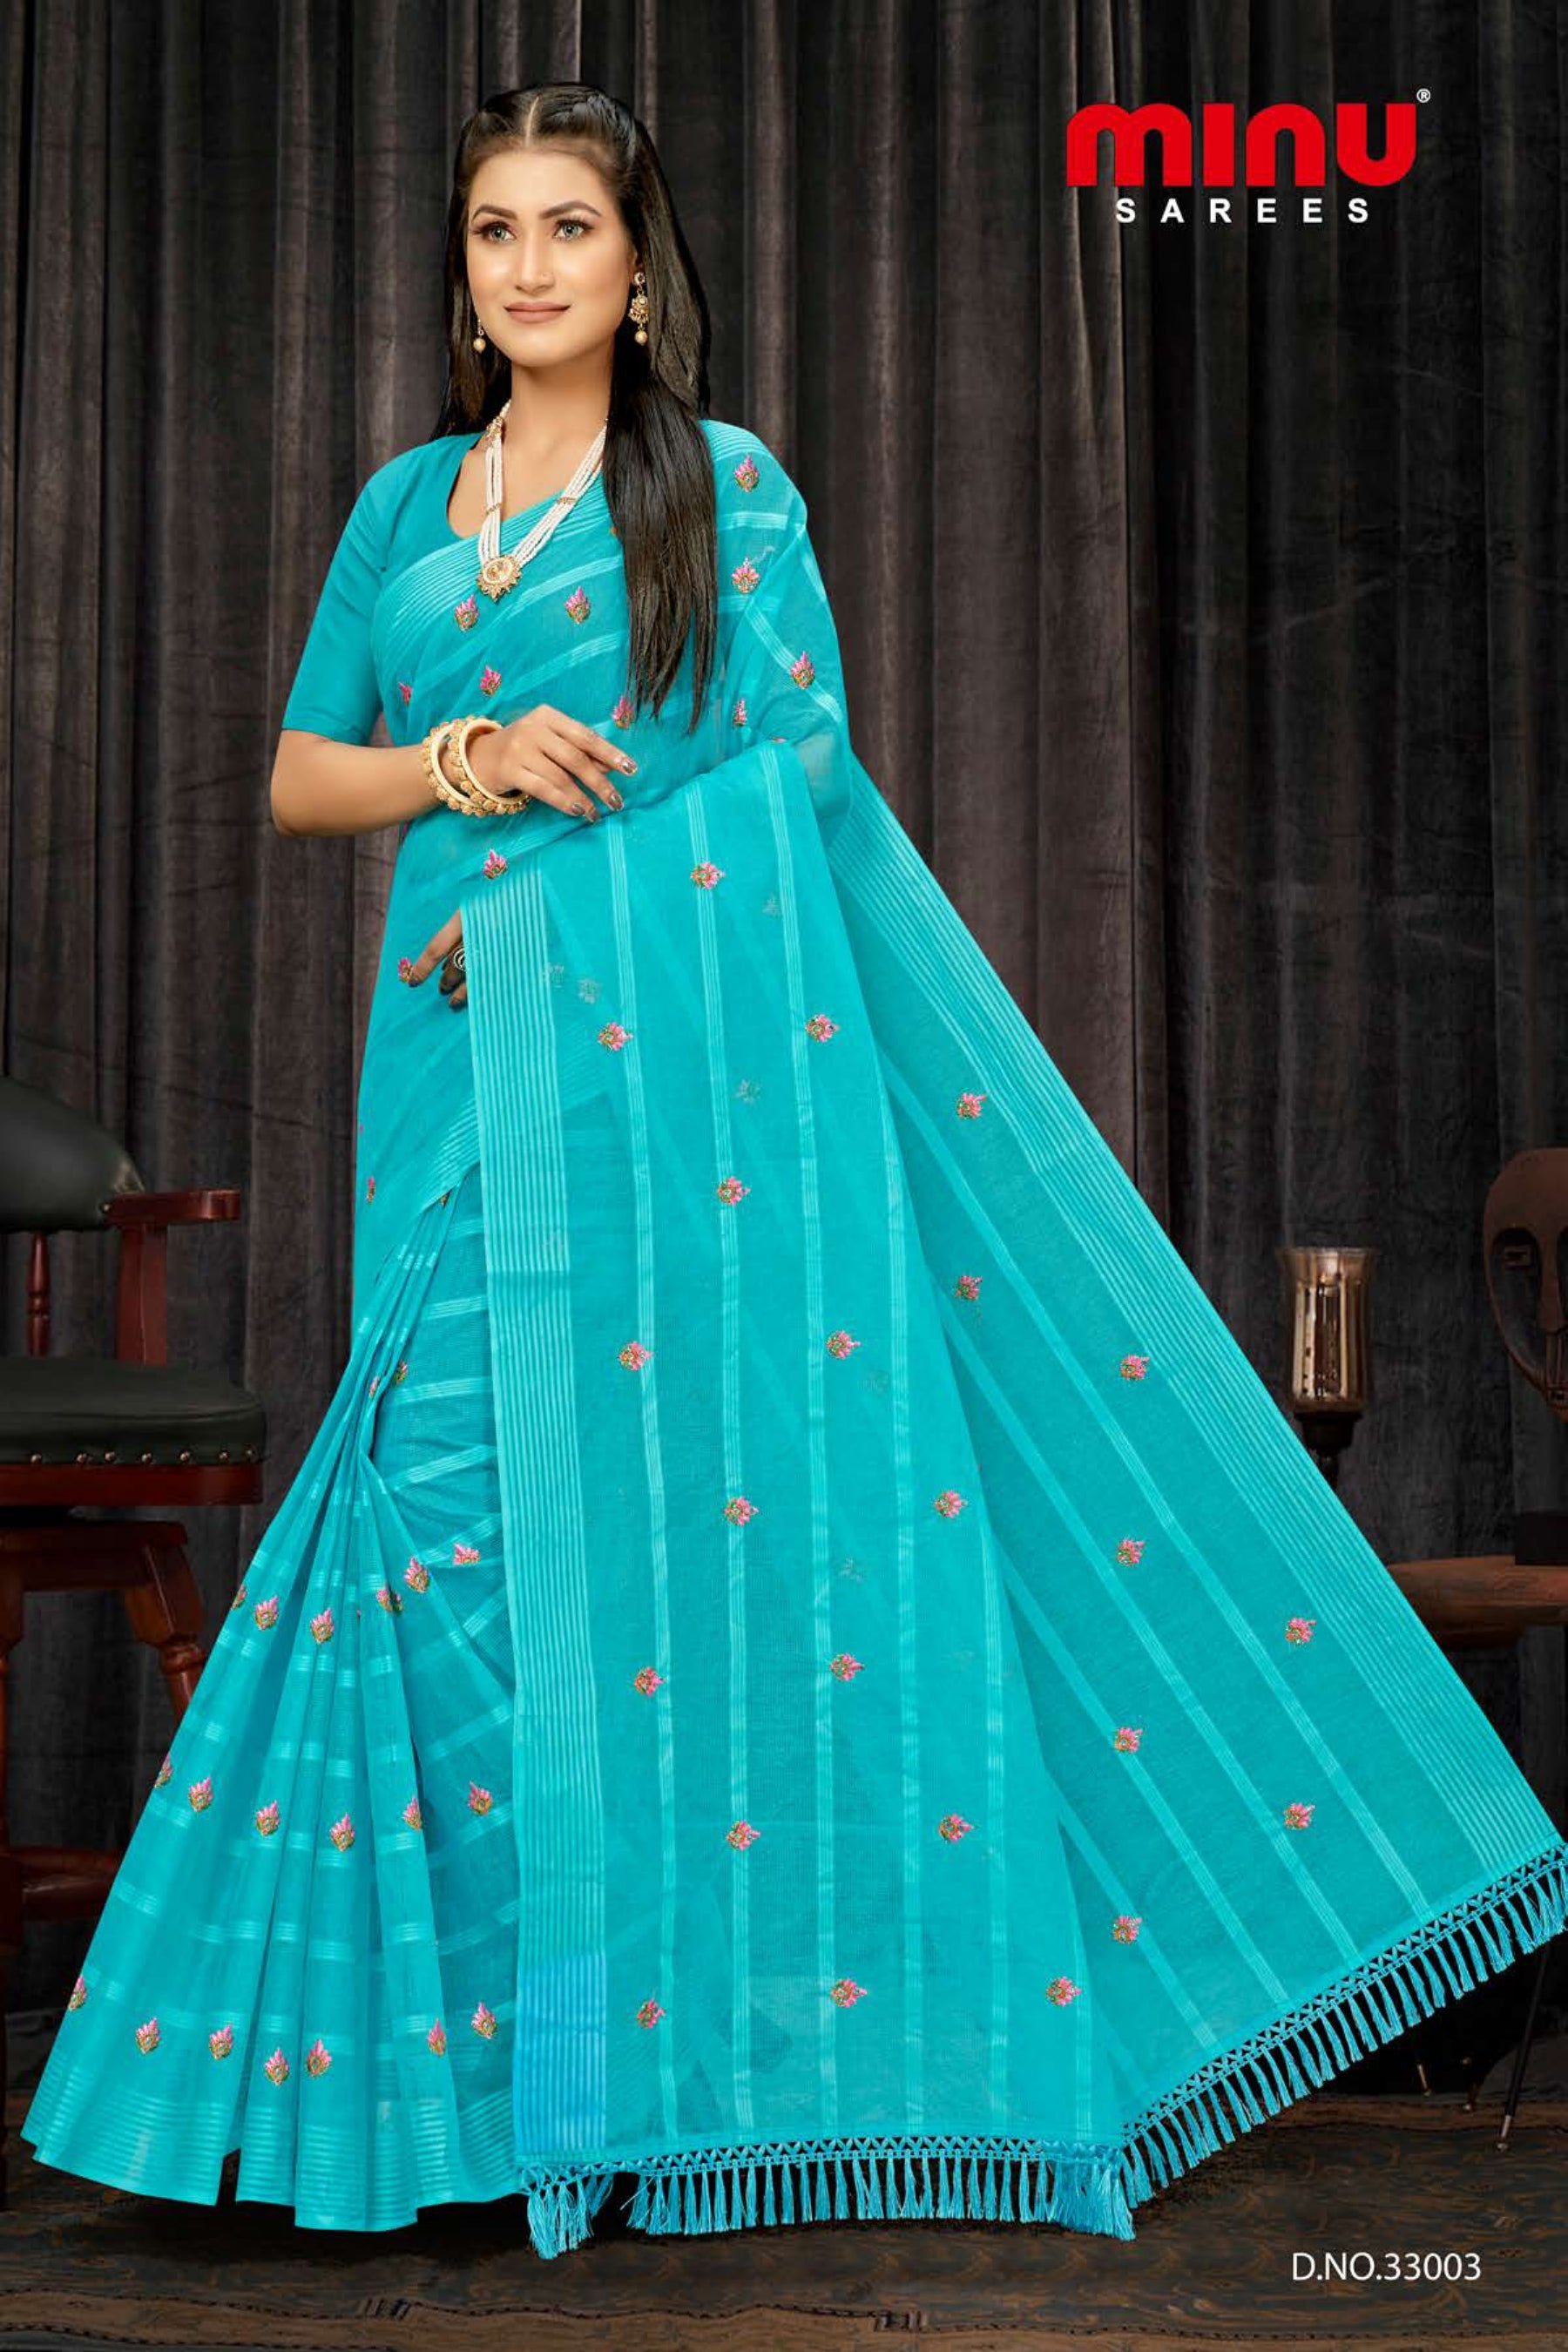 embroidered saree wearing woman